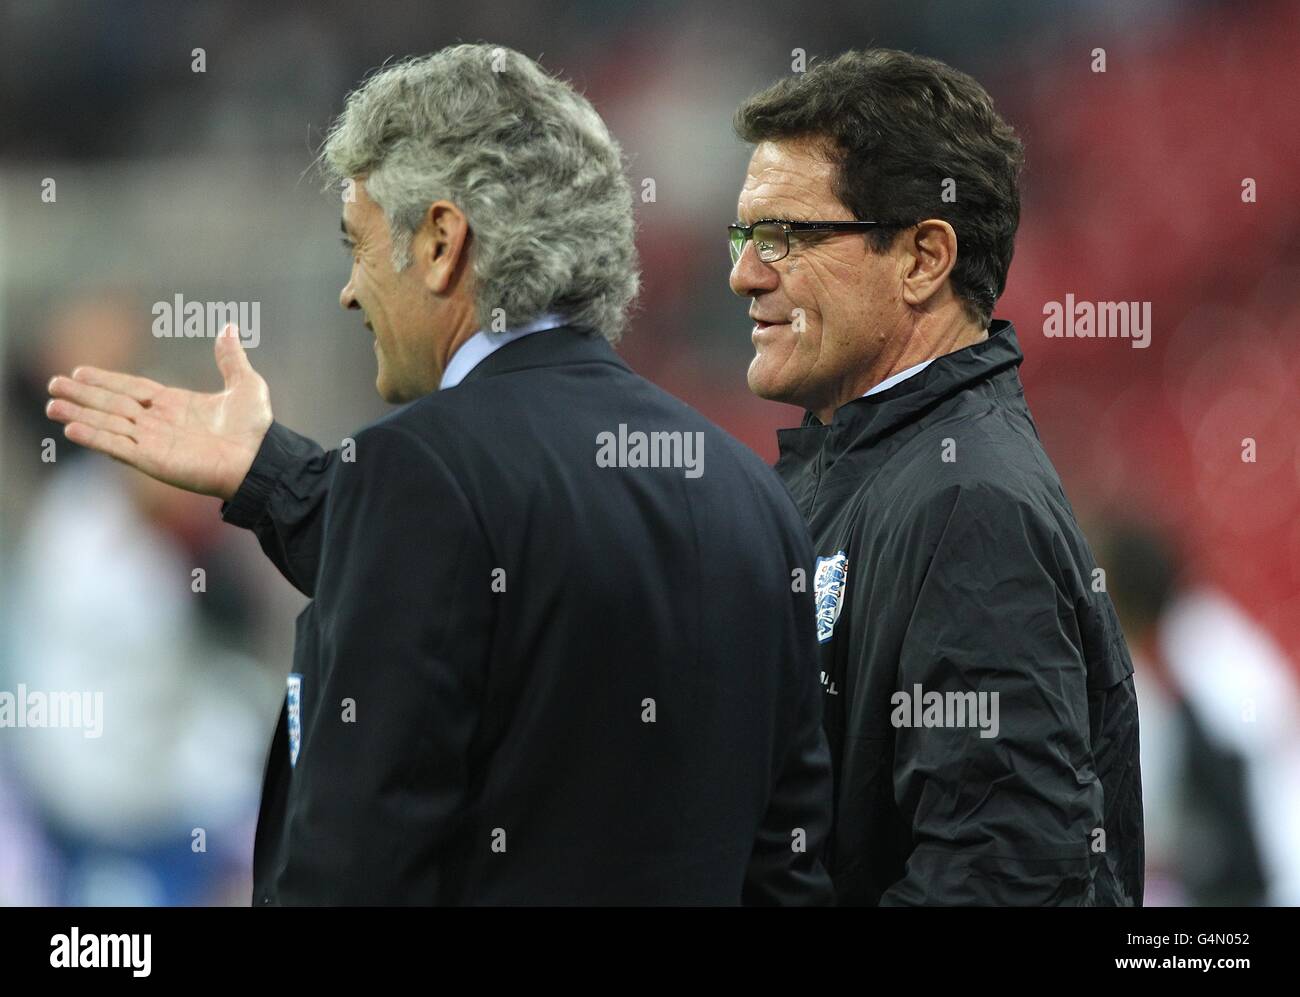 England manager Fabio Capello (right) discusses tactics with general manager Franco Baldini before the match Stock Photo